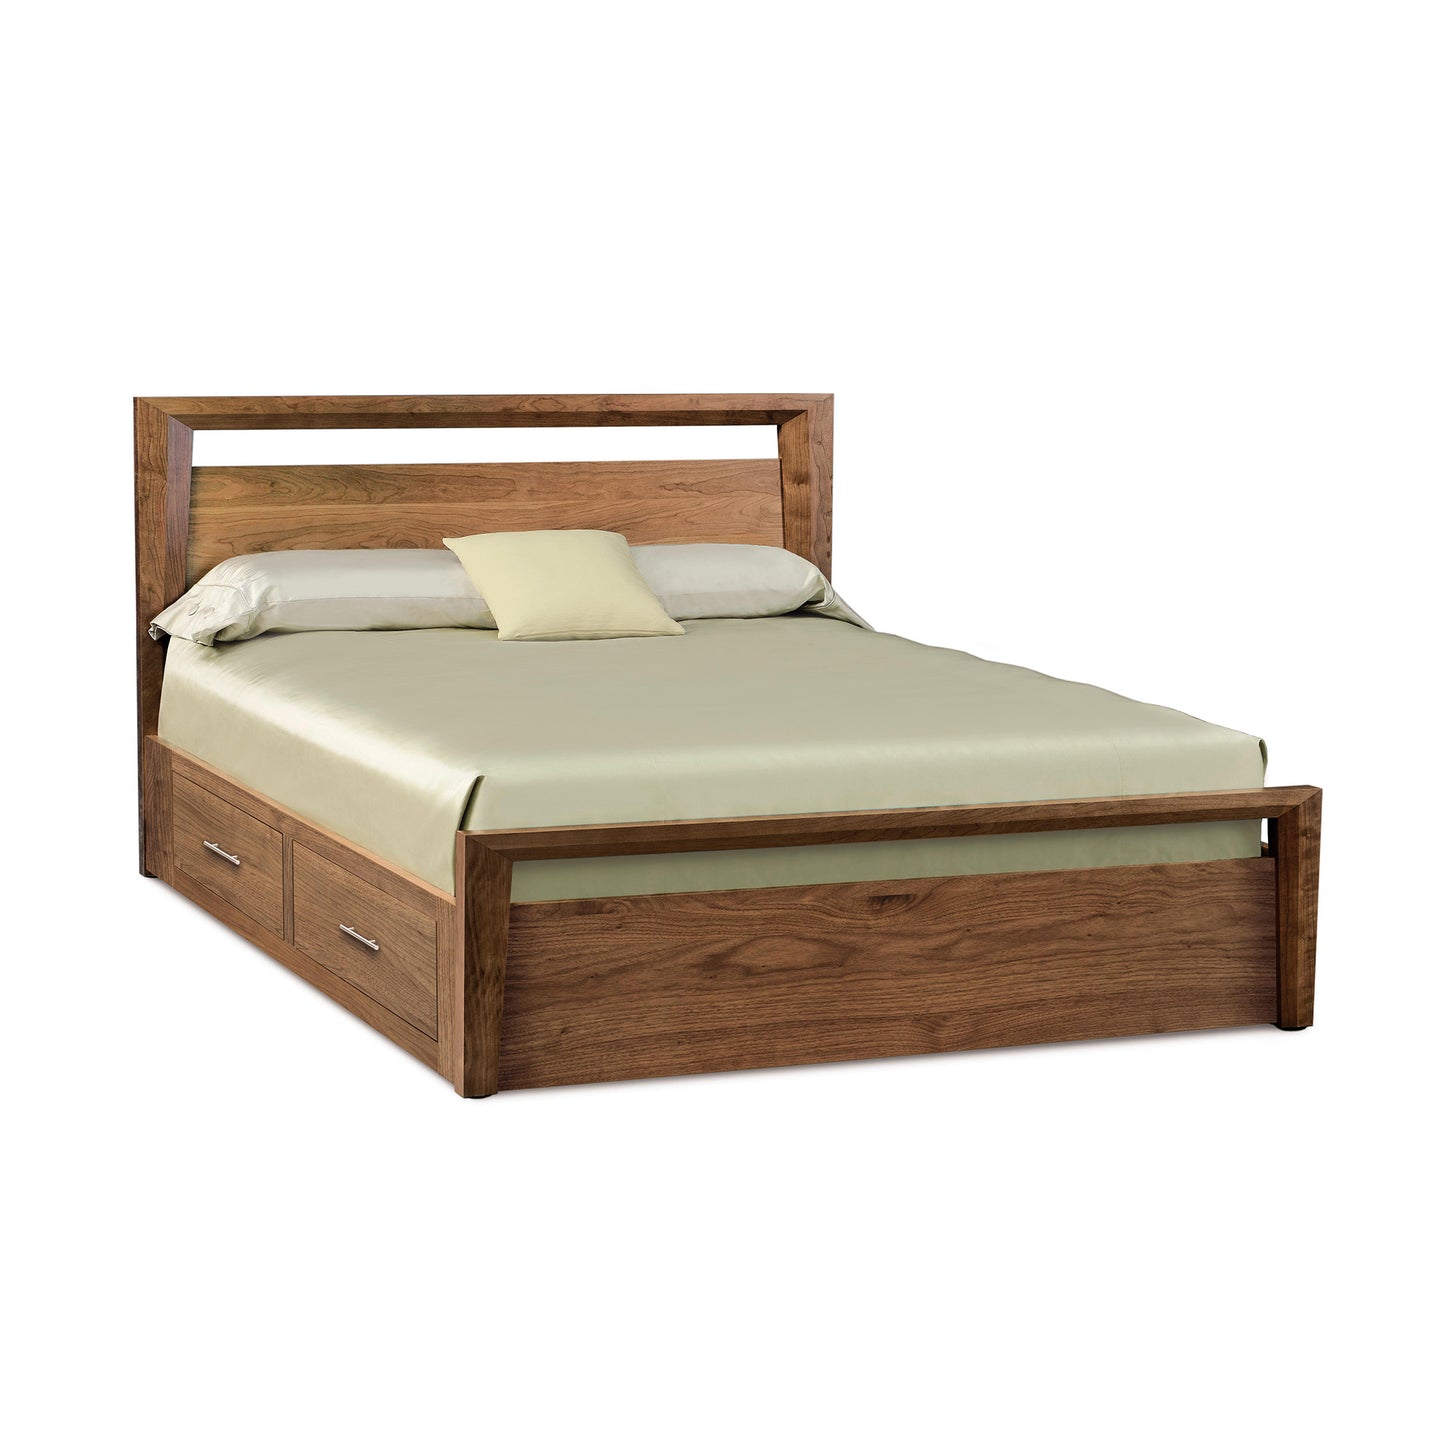 A wooden queen-sized Copeland Furniture Mansfield Walnut Storage Bed frame with a headboard and two storage drawers at the foot end, fitted with a pale bedsheet and a single pillow, featuring Arts & Crafts style solid